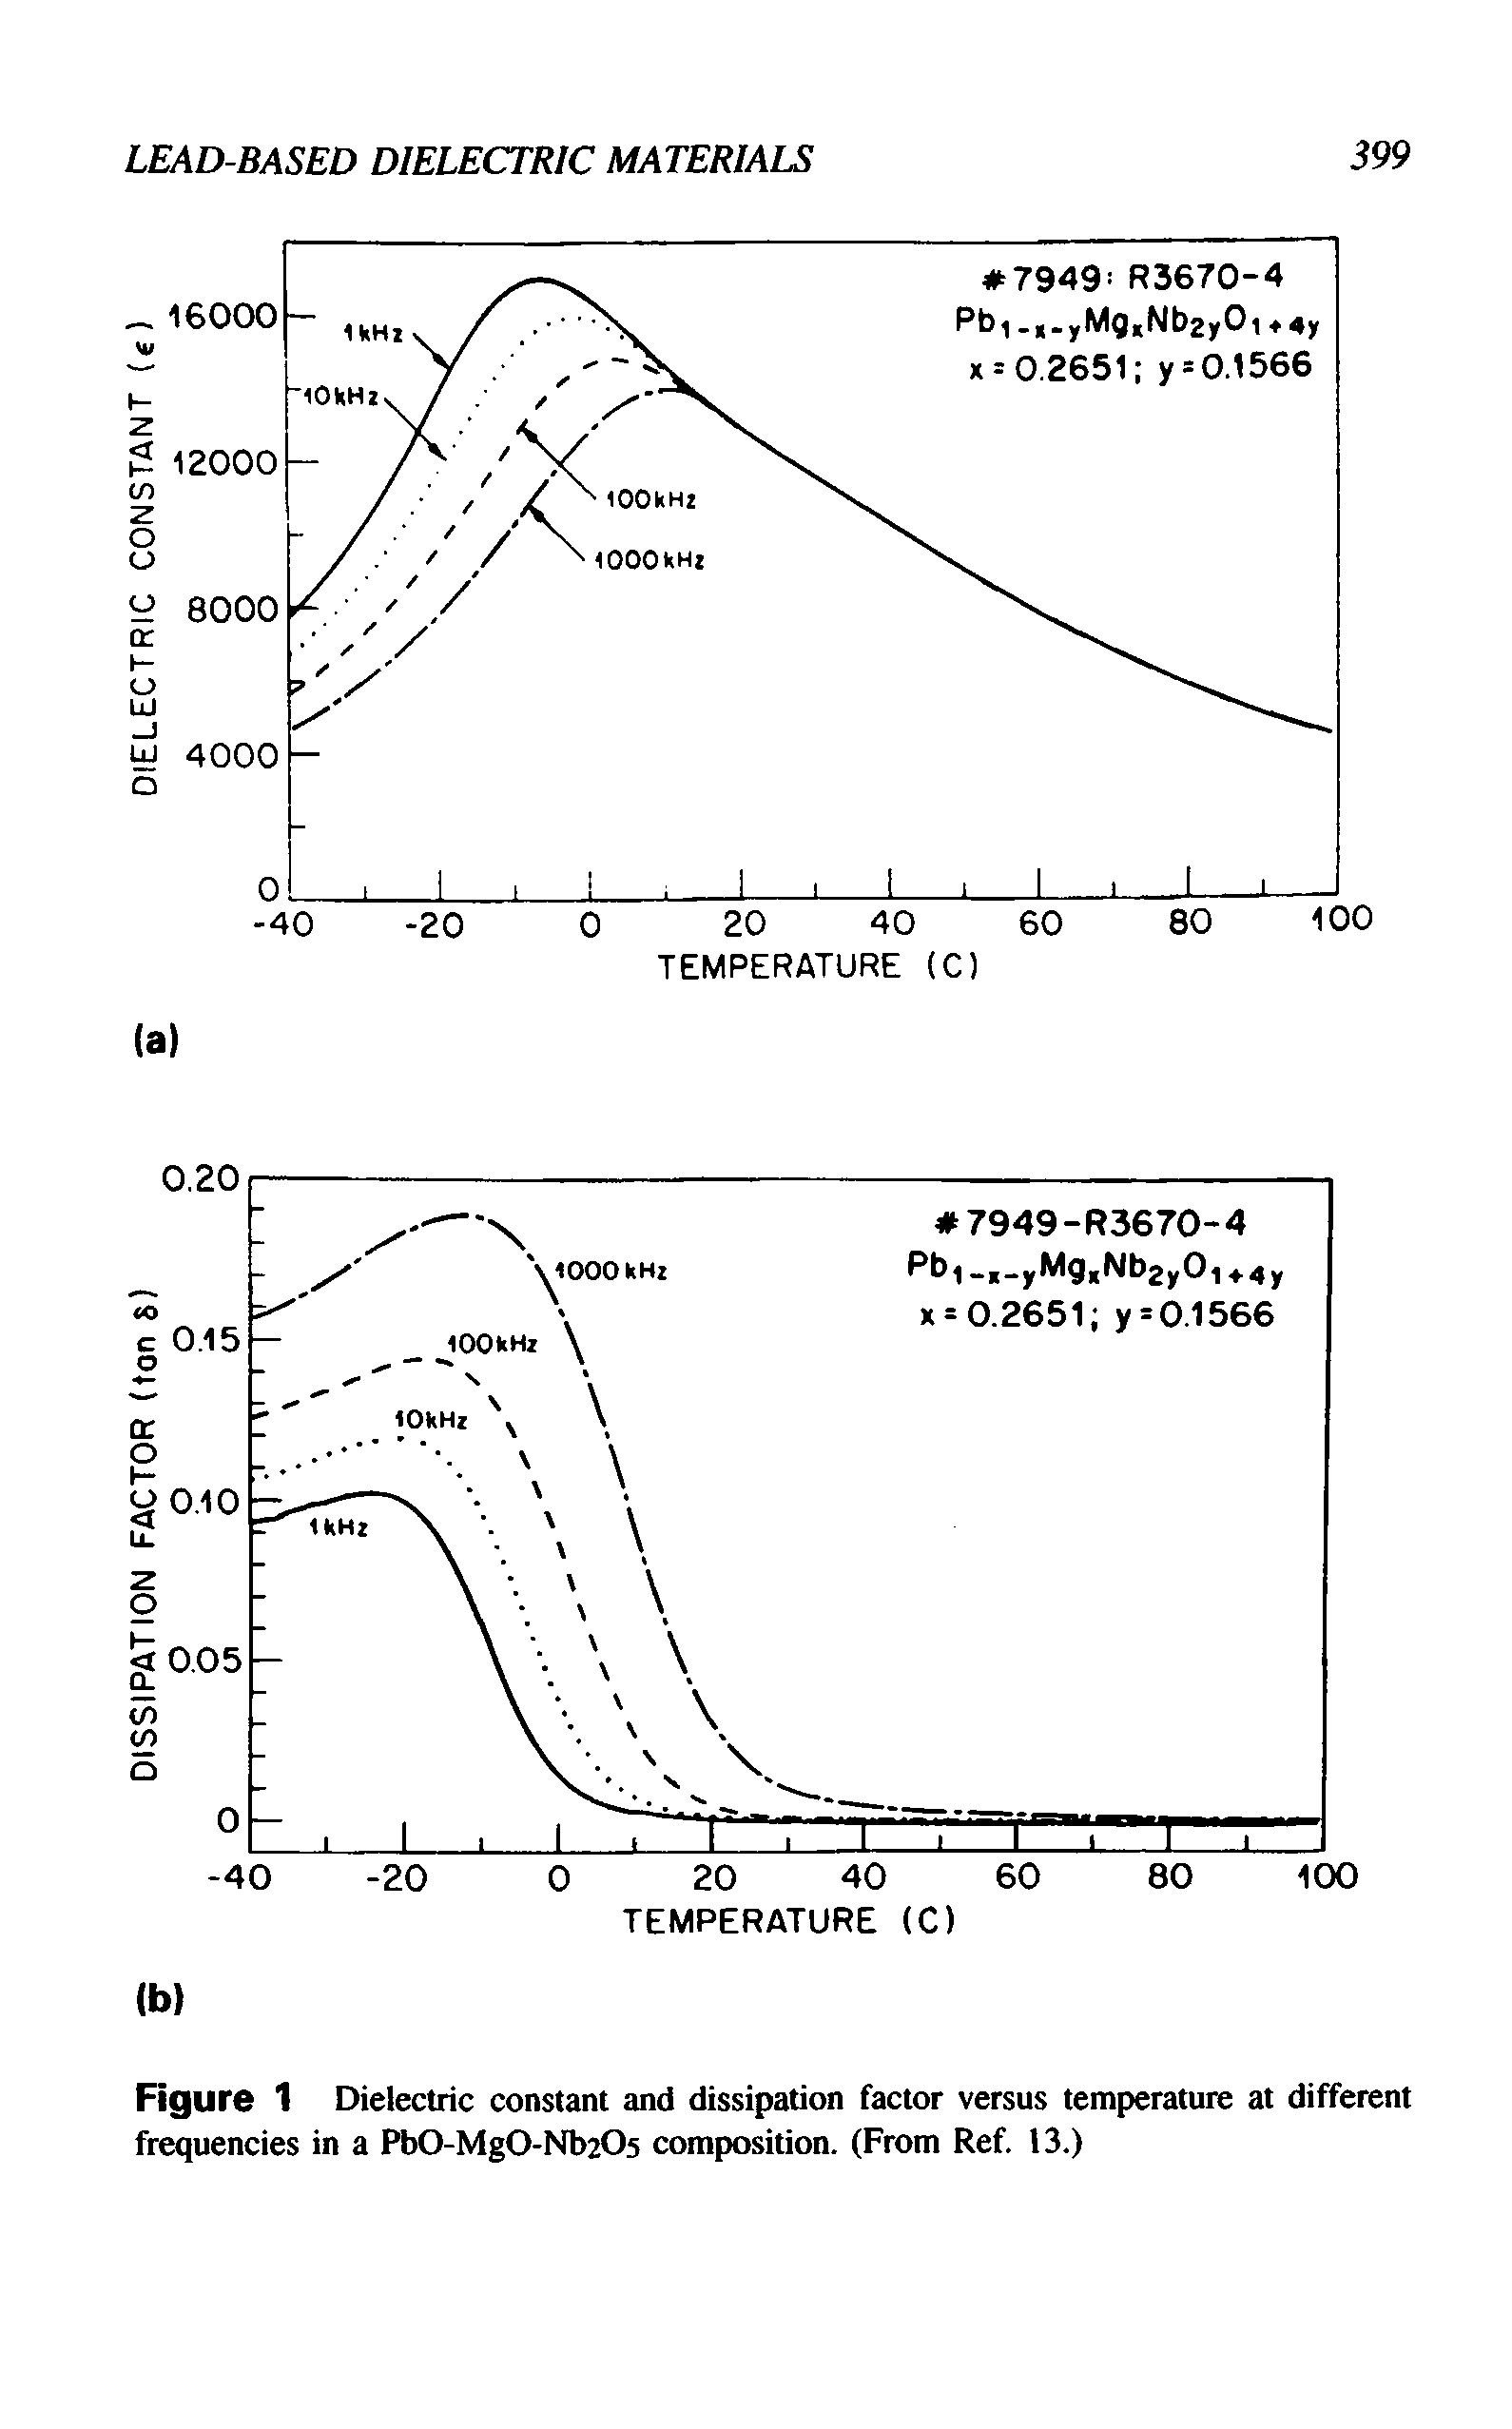 Figure 1 Dielectric constant and dissipation factor versus temperature at different frequencies in a PbO-MgO-NbaOs composition. (From Ref. 13.)...